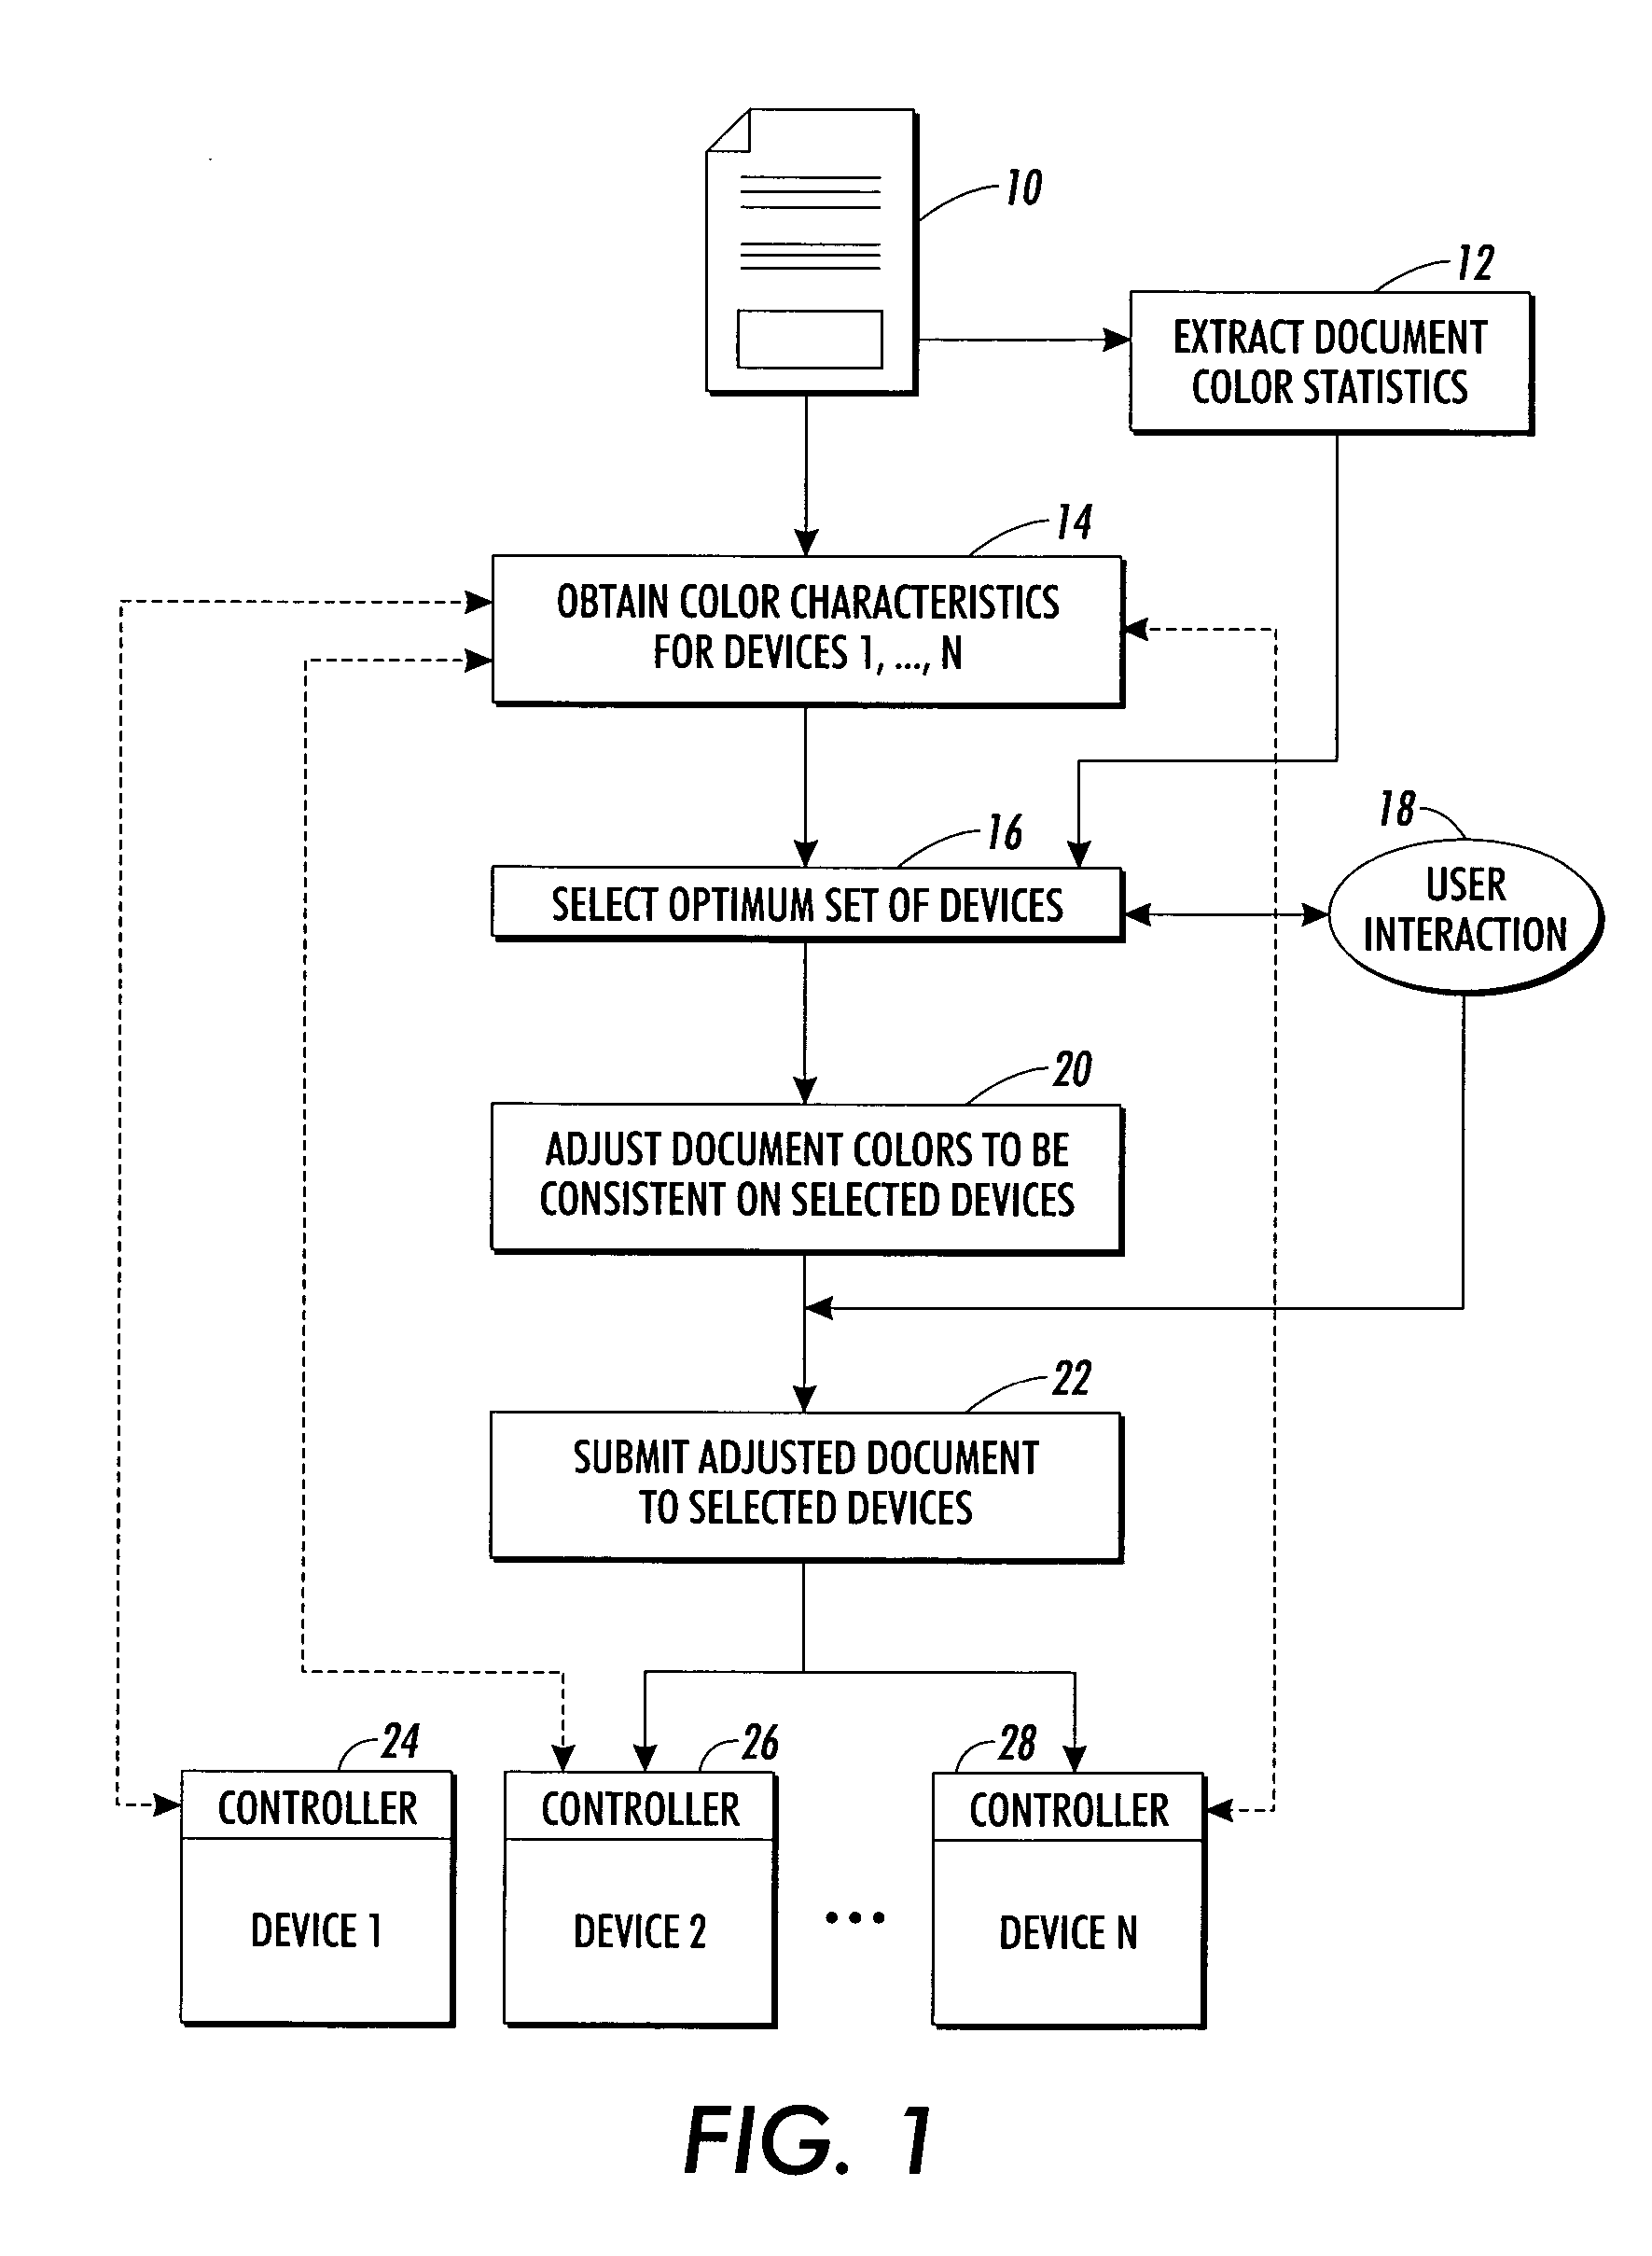 System and method for selecting the best set of devices for rendering color documents